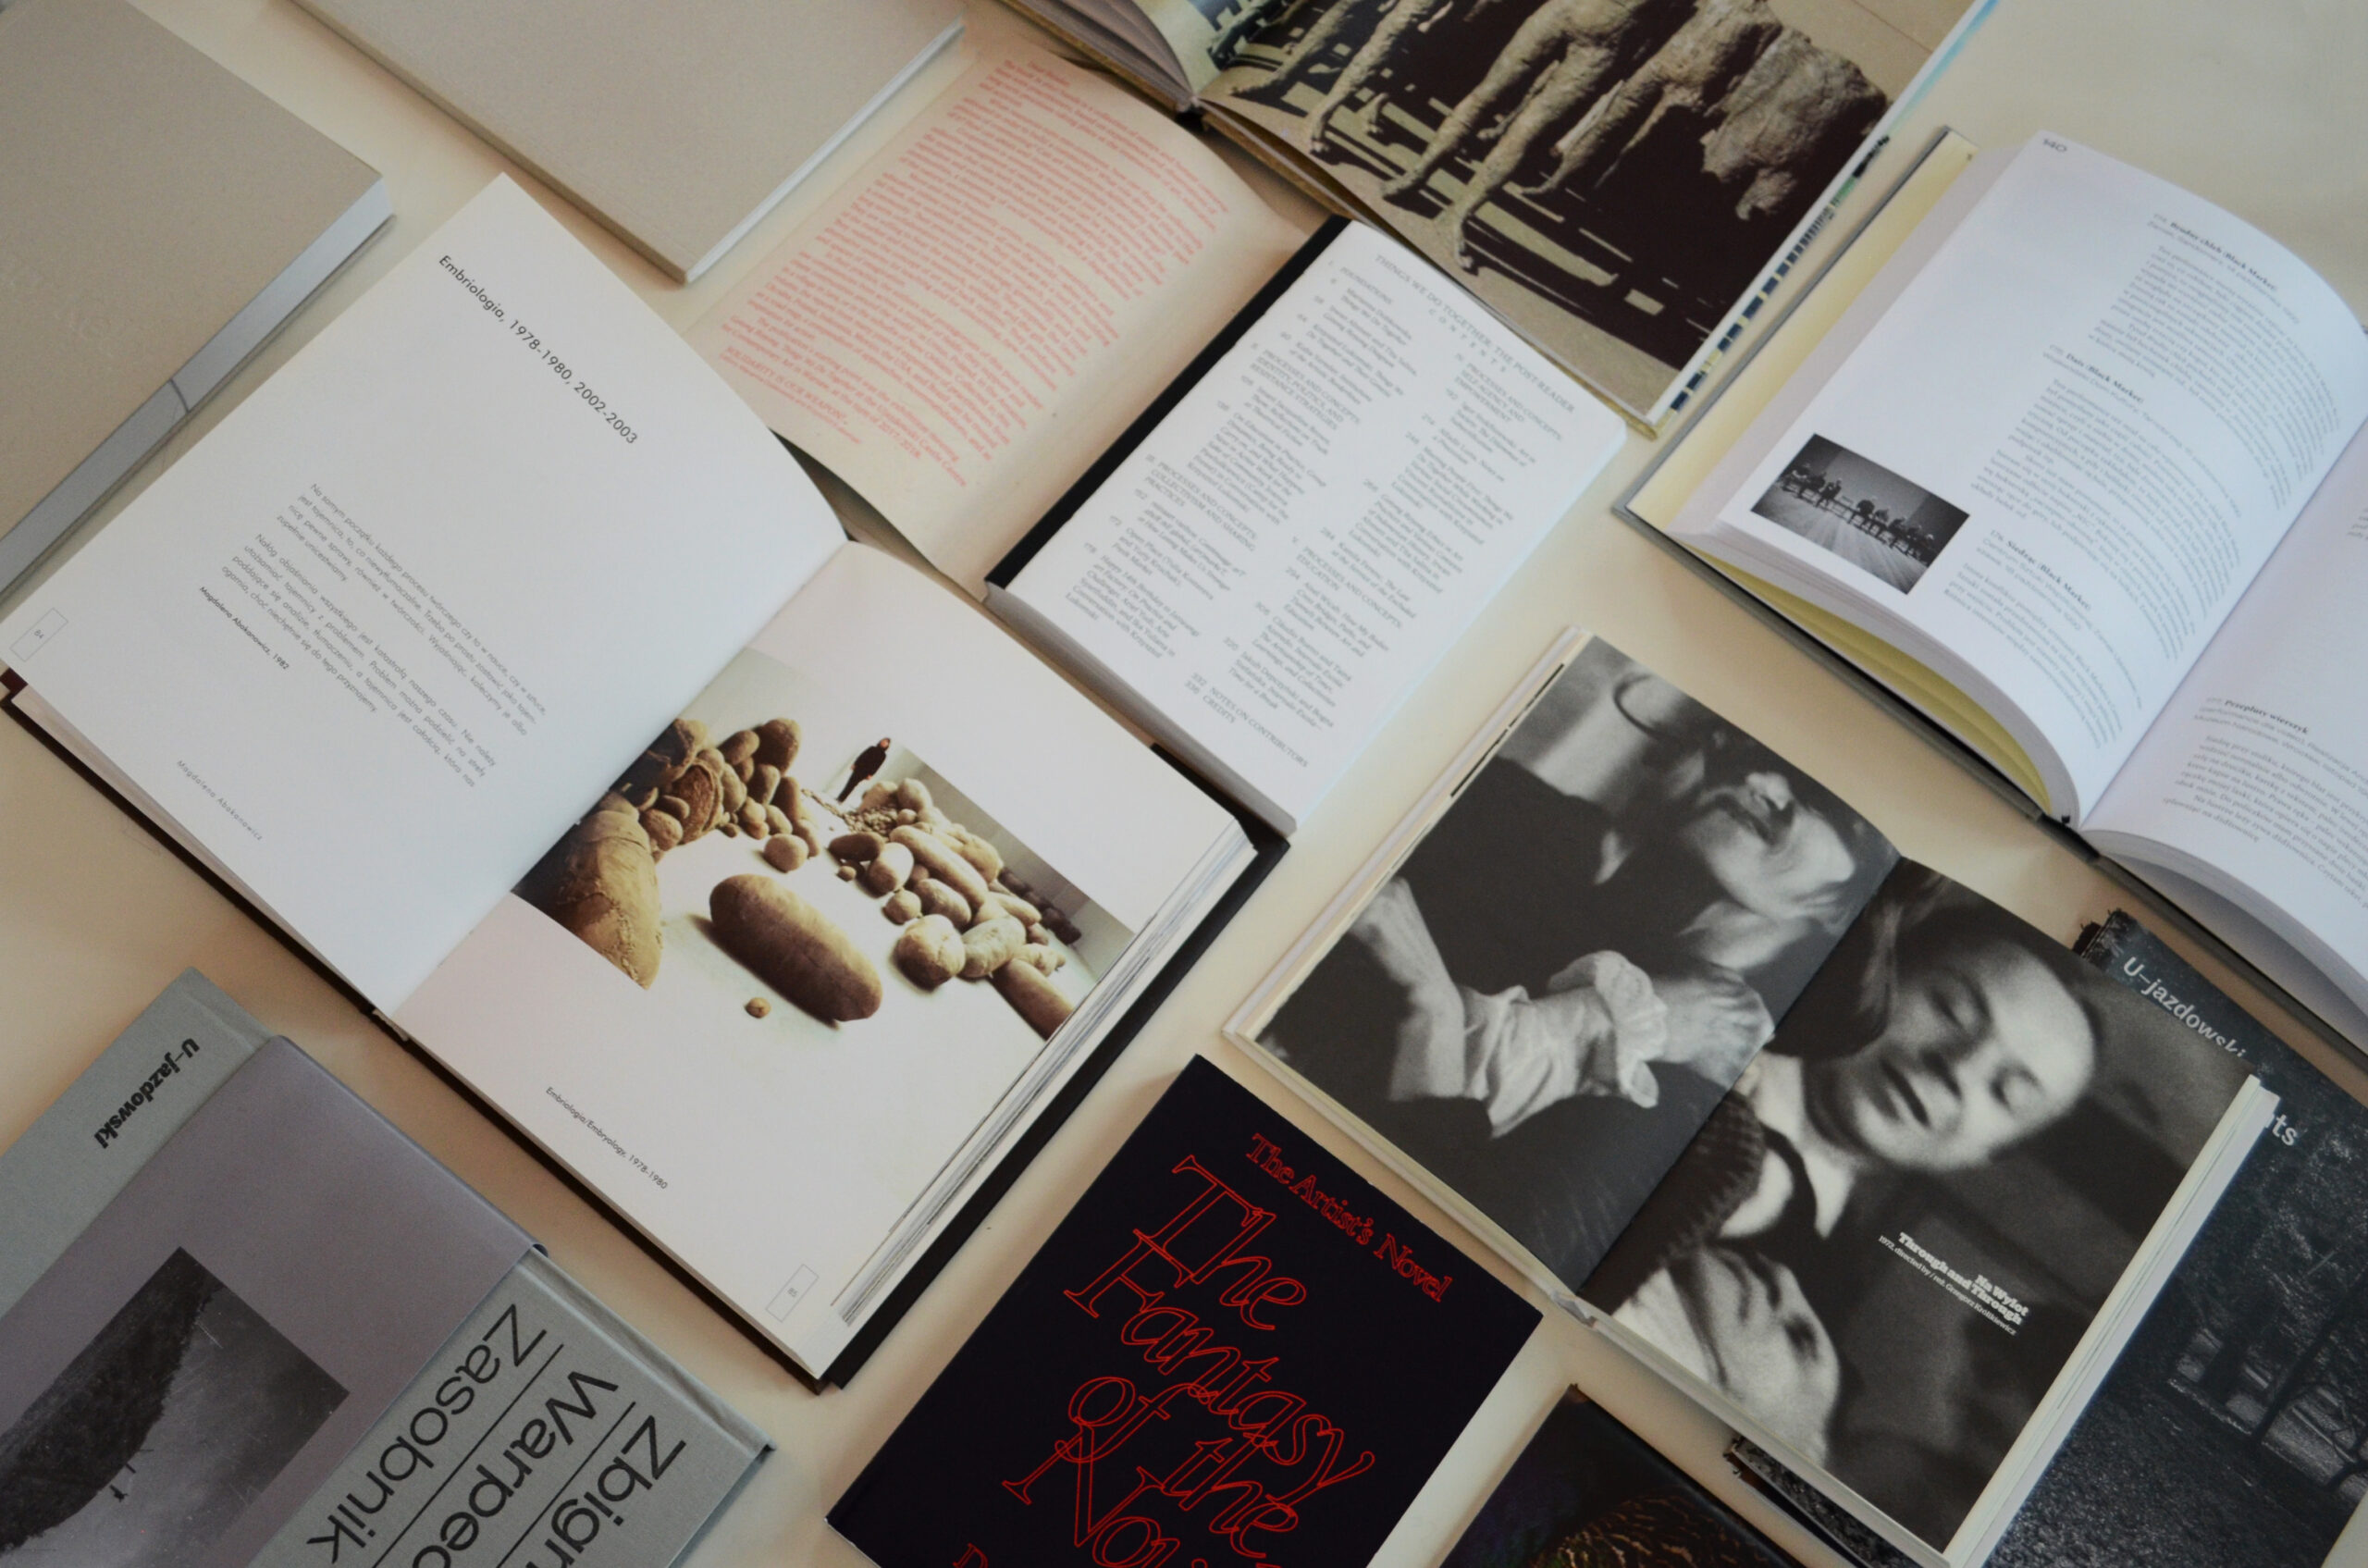 Books about artists and art published by the Ujazdowski Castle Centre for Contemporary Art